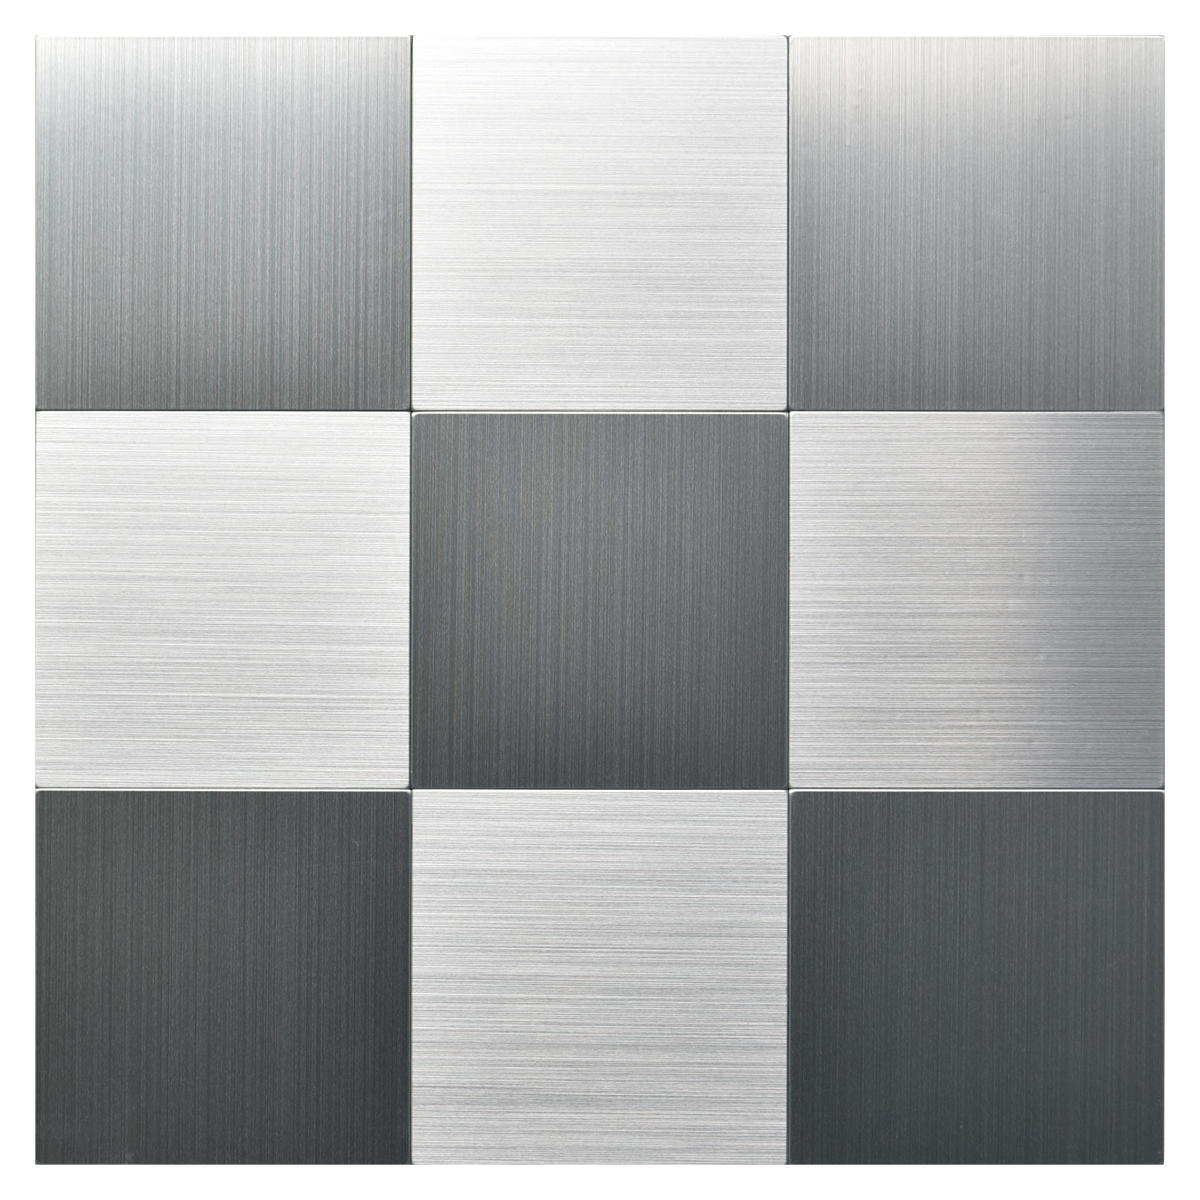 Art3d Peel and Stick Metal Backsplash Tile, Brushed Stainless Steel in Square, Pack of 10 Tiles 12x12